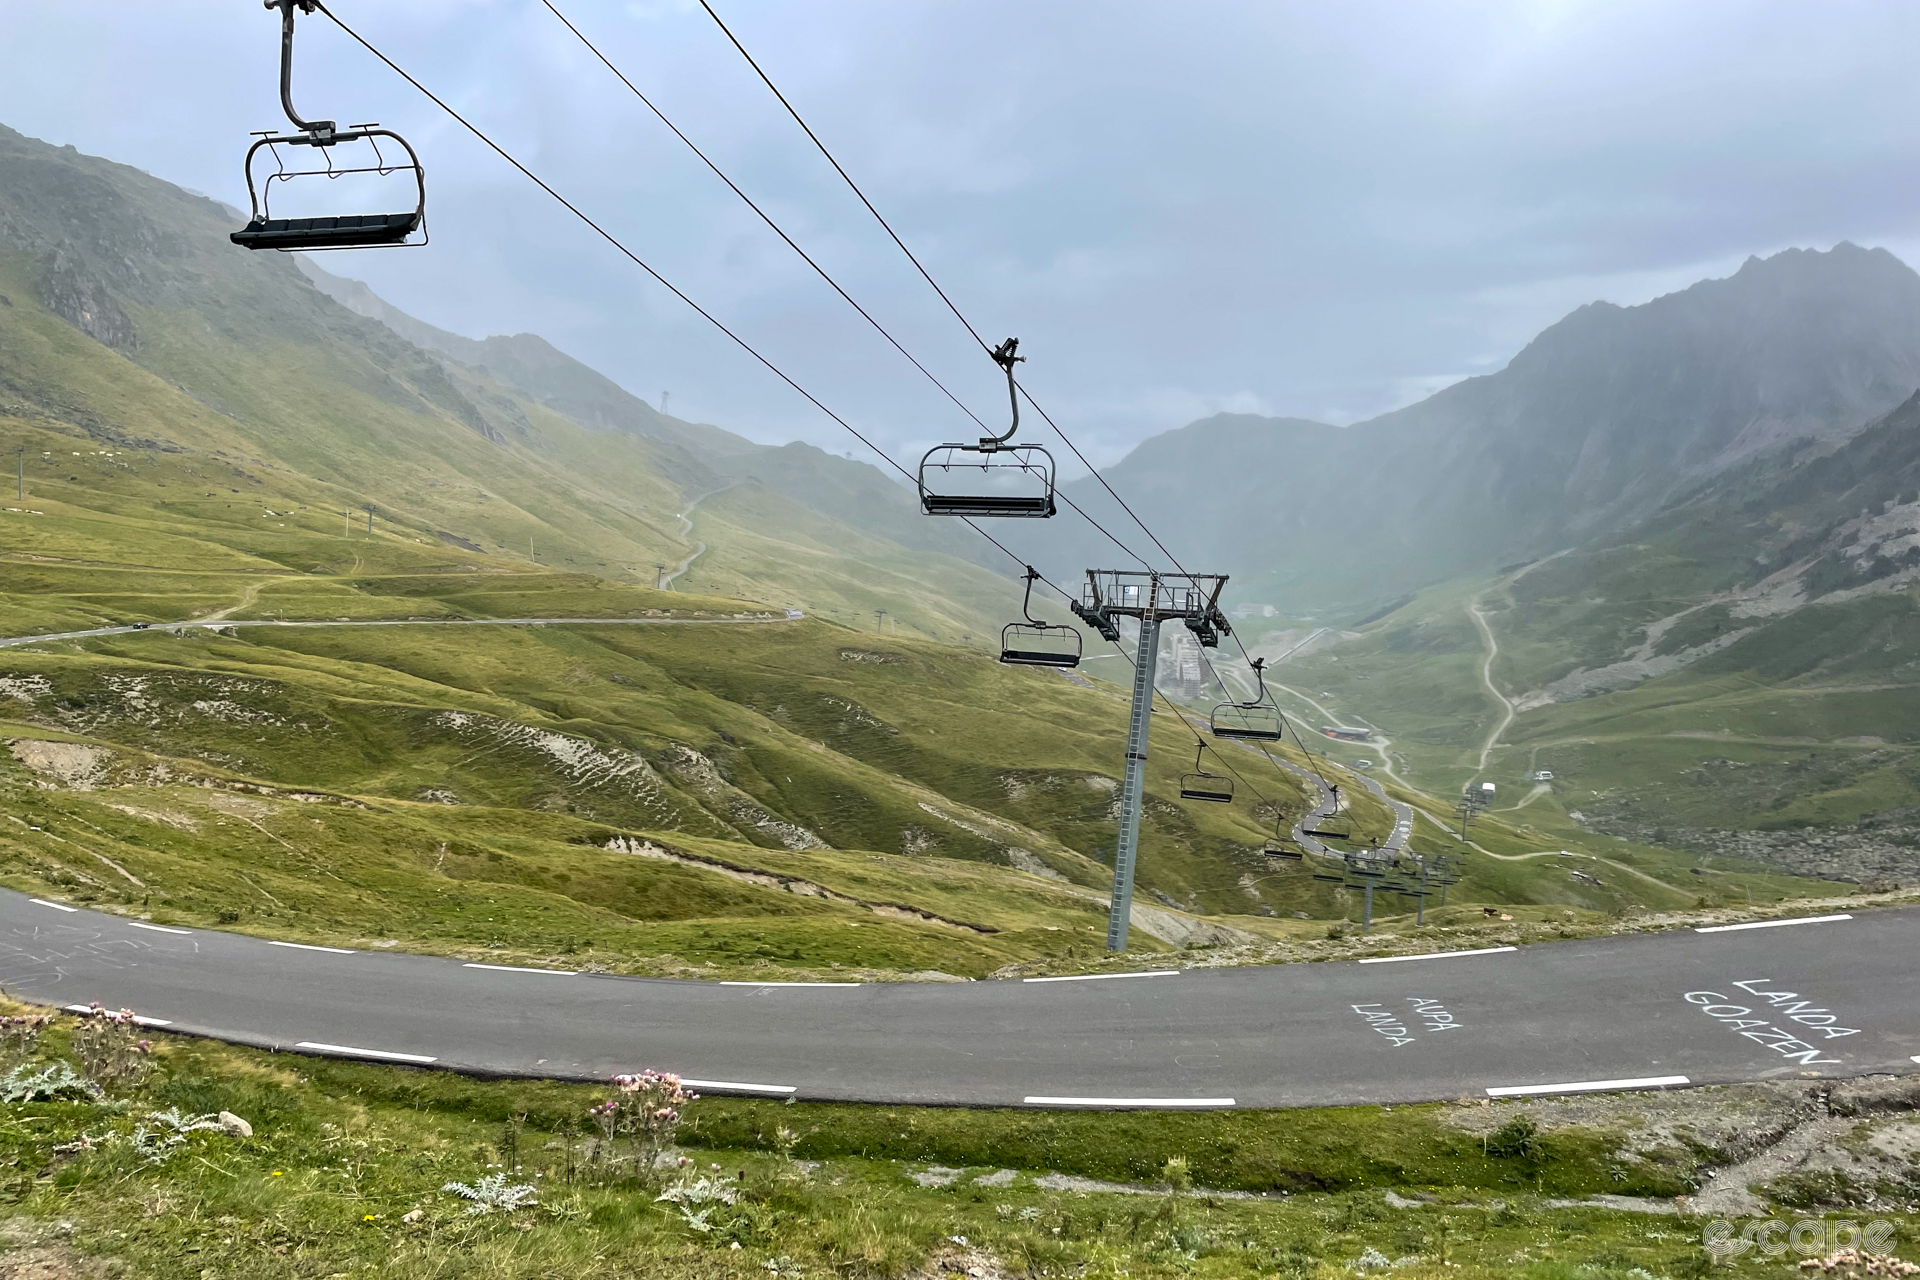 A dormant ski lift crosses the road up the Tourmalet, with empty chairs against a misty, green landscape.